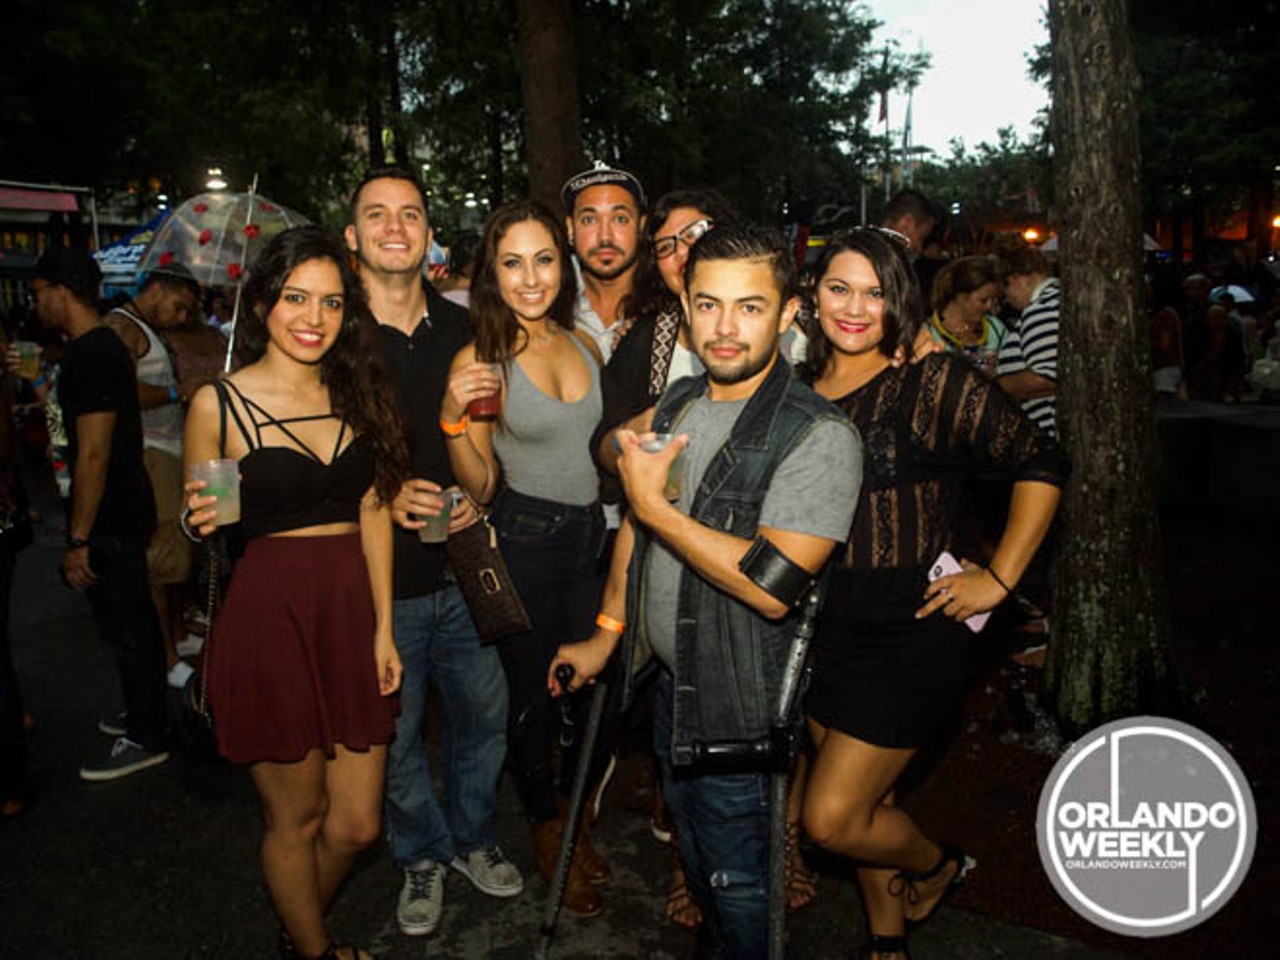 MargaritaFest
Wall and Court Streets, Downtown Orlando, Aug. 27, 5-9 p.m.
Come out to MargaritaFest to try more than 20 different types of tequilas and margaritas. If anything, it&#146;ll help you jam out harder to the live entertainment of the event. Tickets are $20.
Photo via Orlando Weekly